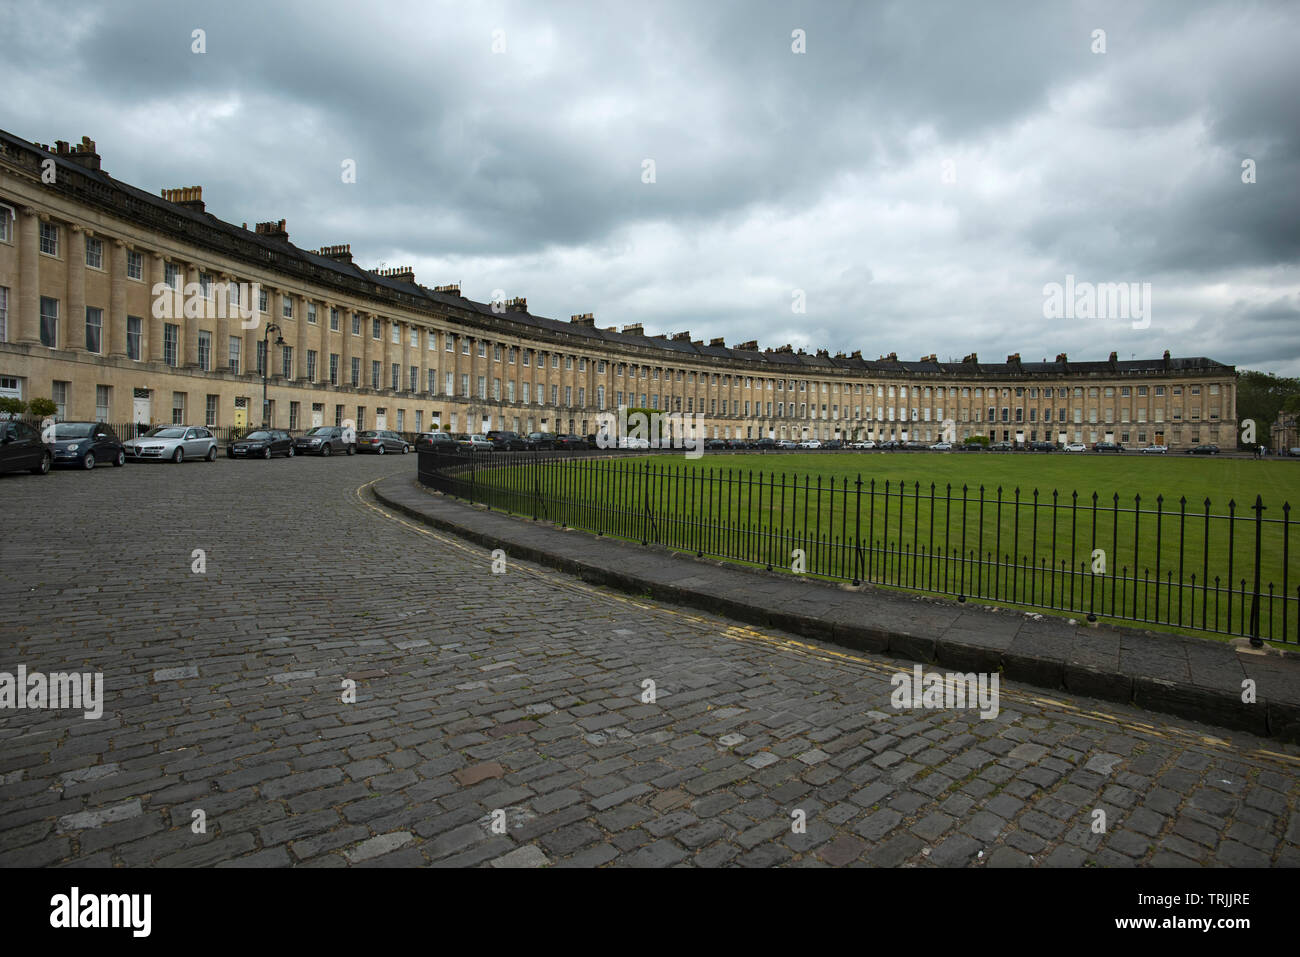 Bath Somerset England UK. June 2019 The Royal Crescent. The Royal Crescent is a row of 30 terraced houses laid out in a sweeping crescent in the city Stock Photo